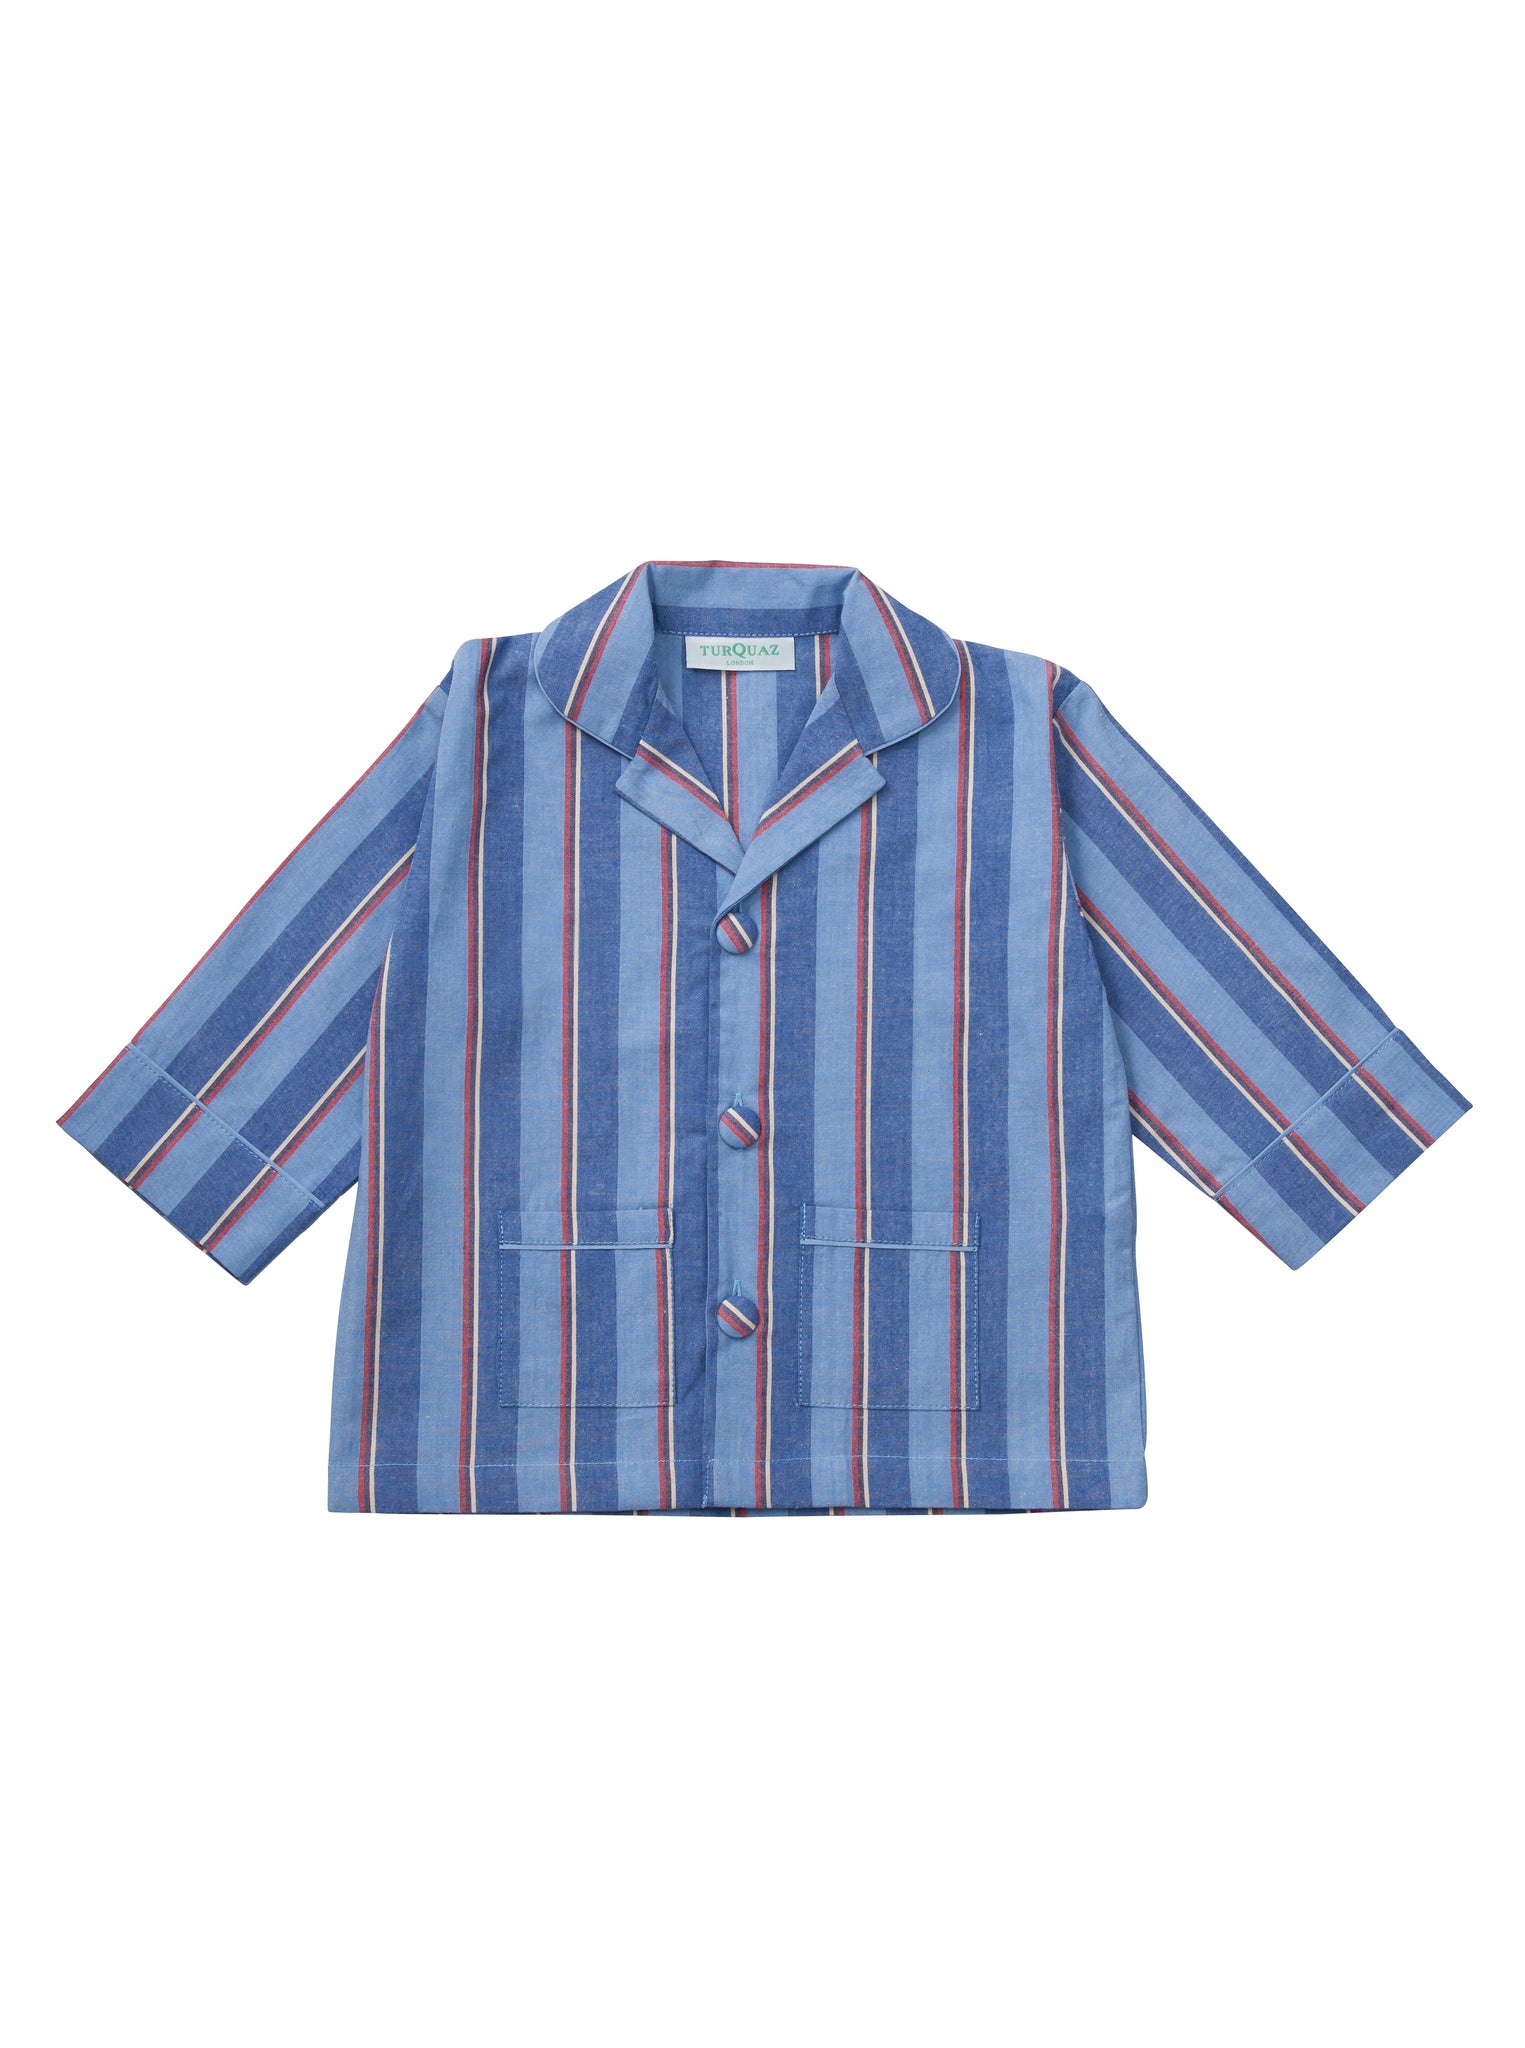 A classic blue and red striped cotton pyjama set for children from Turquaz.